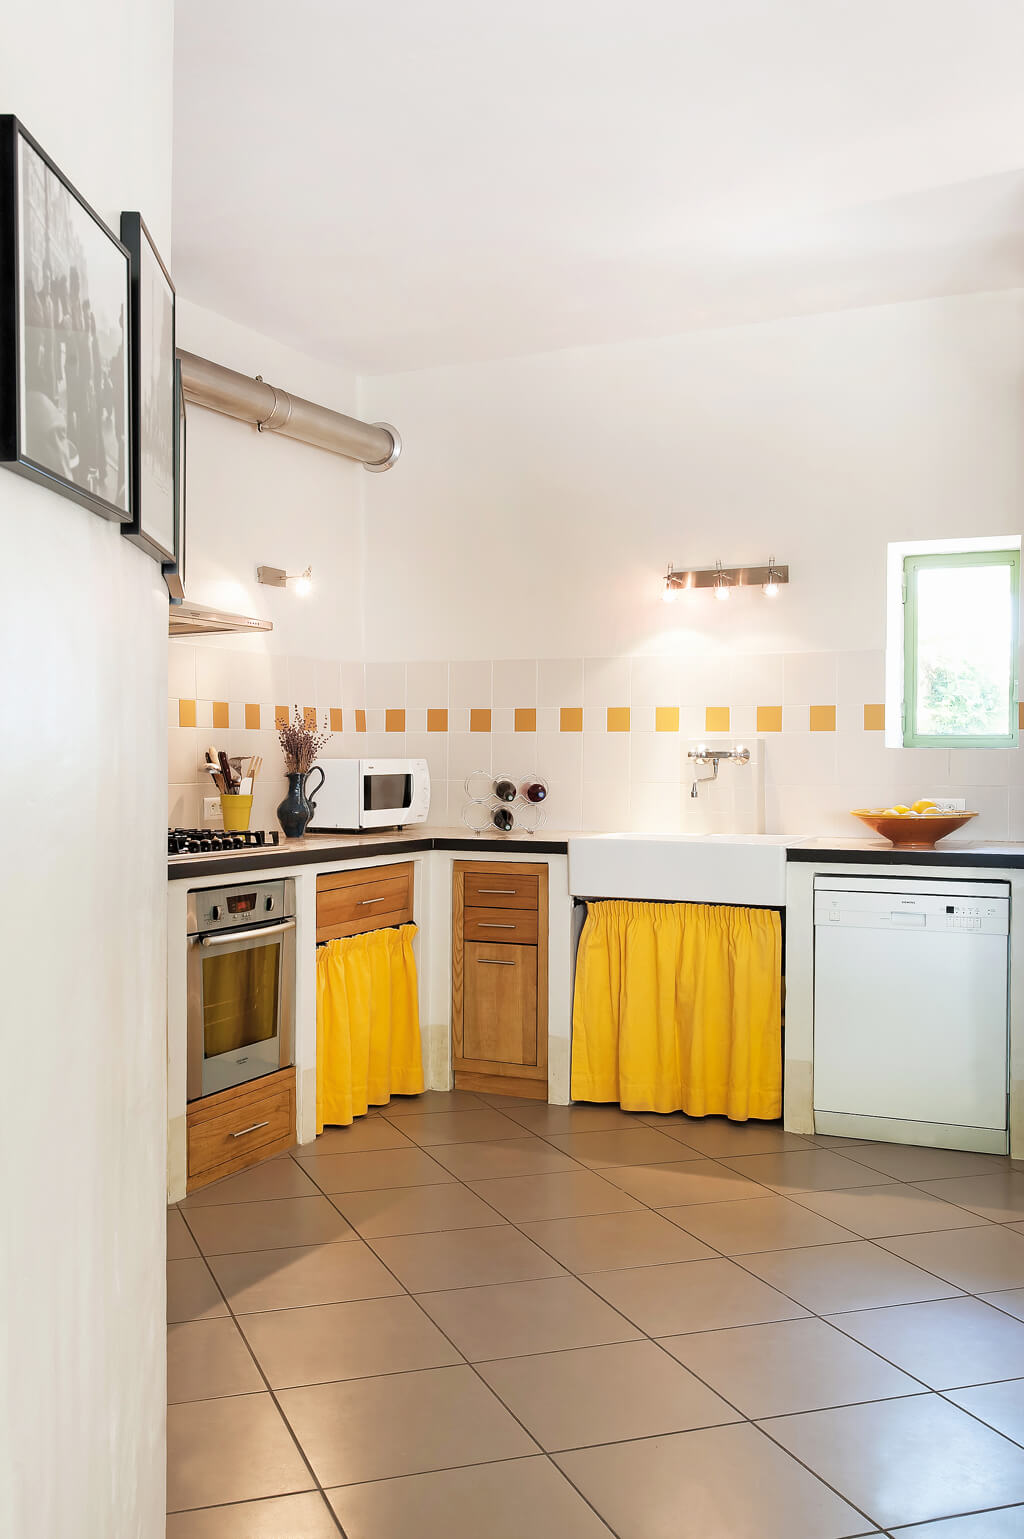 Charming Provence kitchen with bright sunshine yellow skirted sink and accents - Haven In. #frenchkitchen #frenchcountry #brightyellow